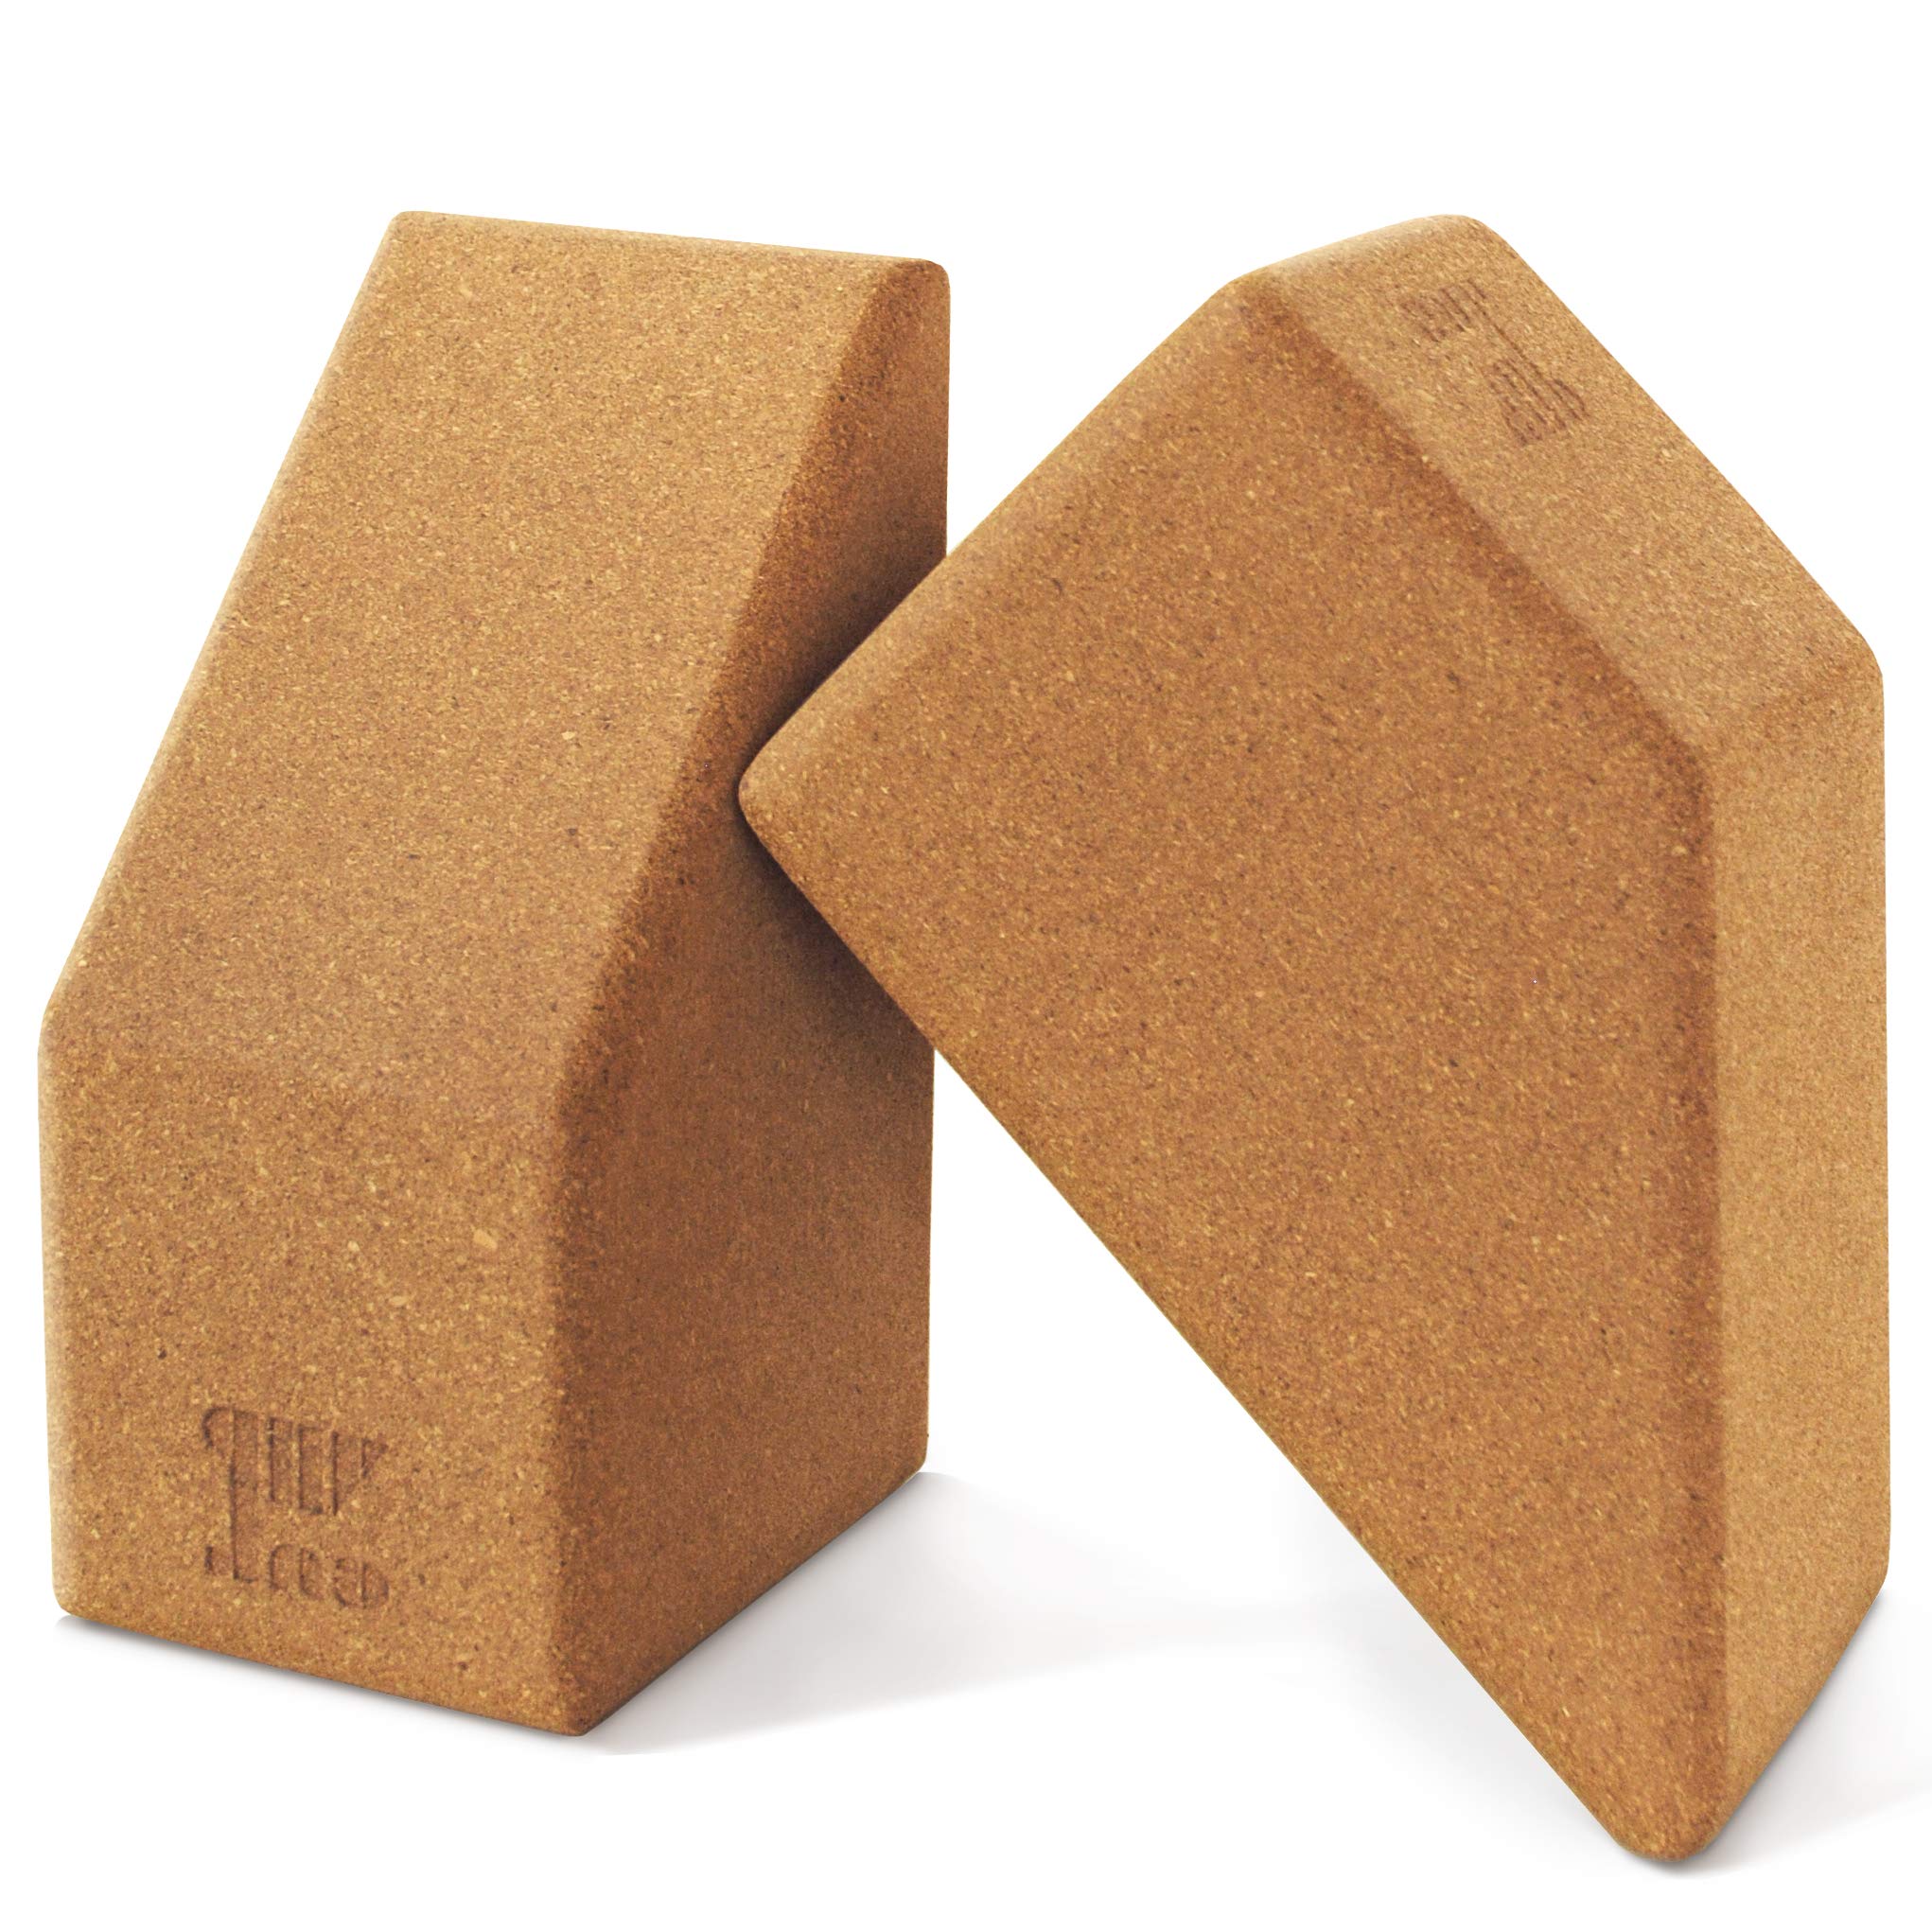 Multifunctional Cork Yoga Blocks 2 Pack - Trapezoid Yoga Block Set,  Regular+ Handstand Blocks + Wrist Support Wedge + Calf Stretch Wedge, Firm  Stretching Exercise Accessories